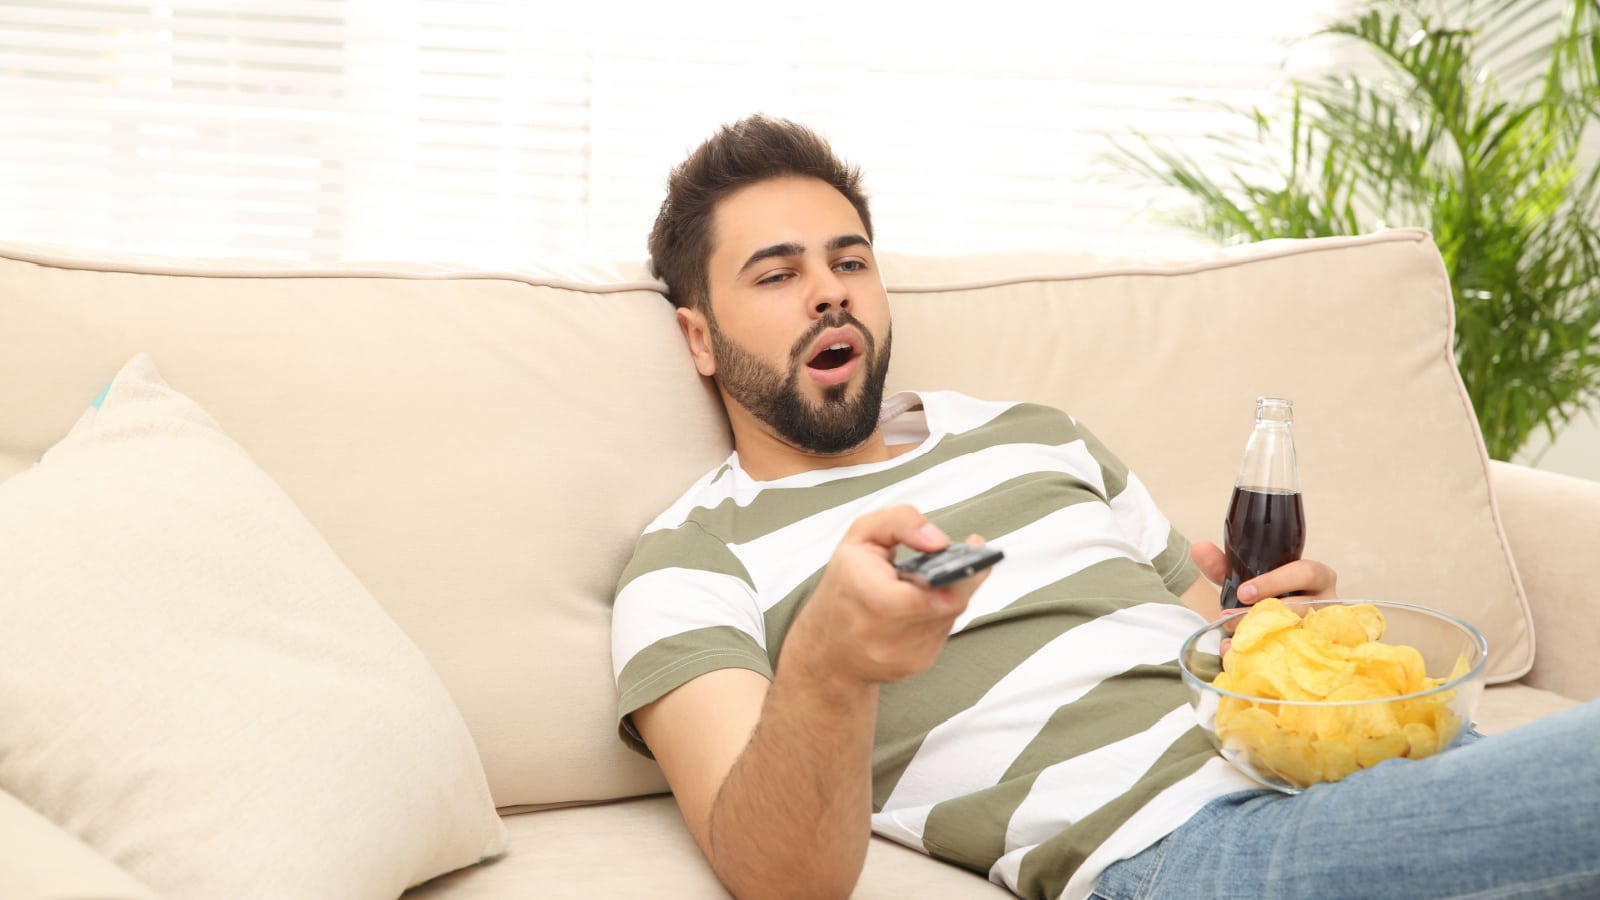 Lazy young man with chips and drink watching TV on sofa at home